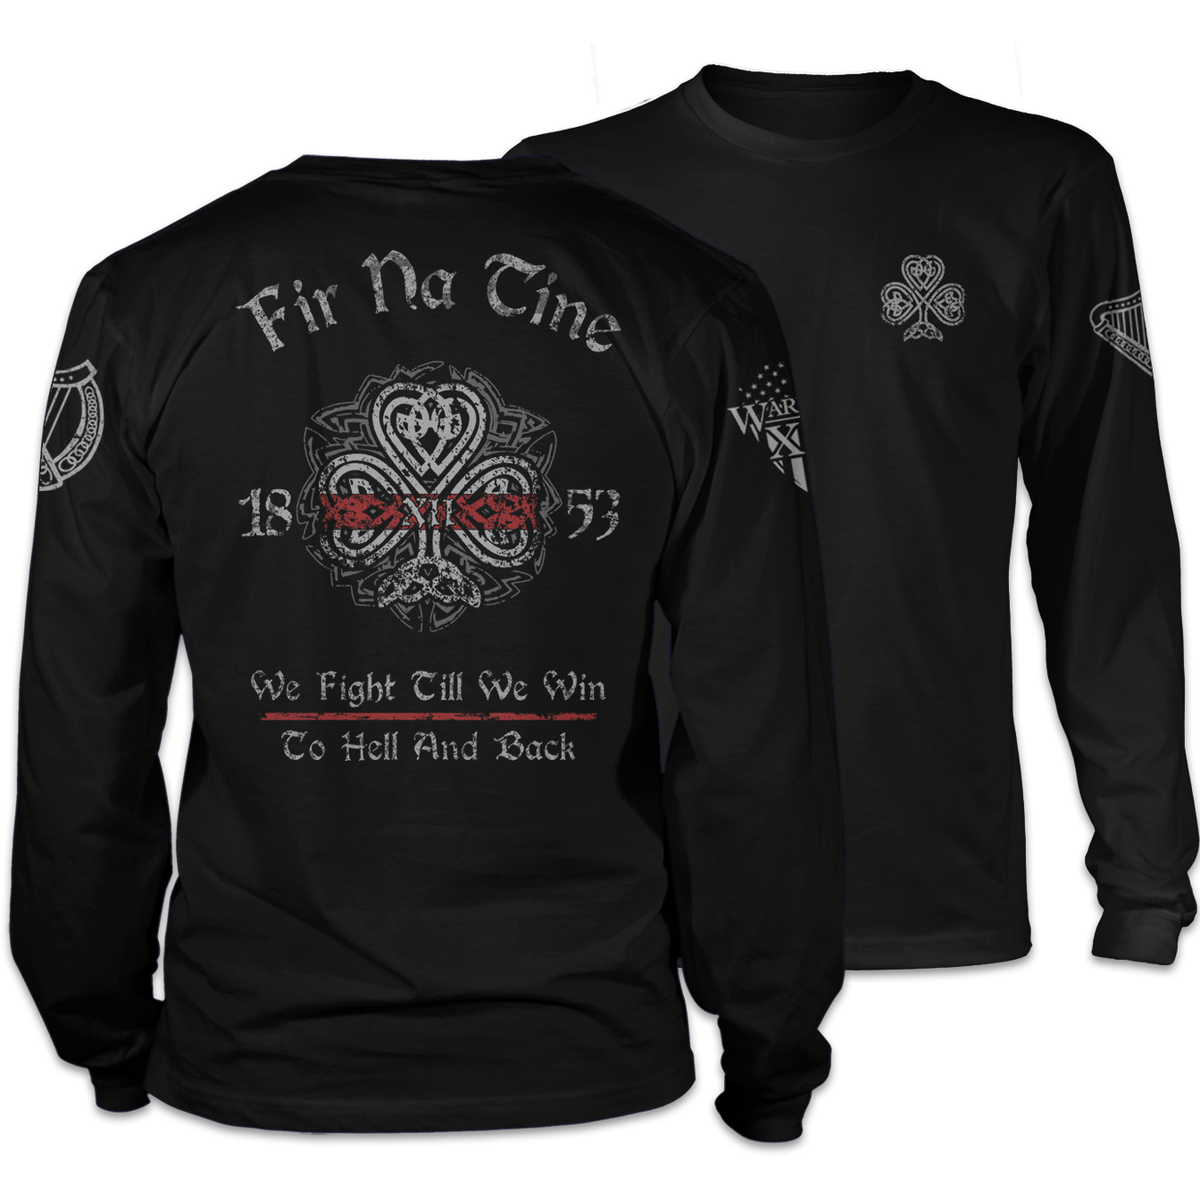 Front & back black long sleeve shirt pays tribute to the history and traditions of Irish firefighters, and showing true Celtic pride. Fir Na Tine, meaning, "Men of Fire" in Gaelic, is written across the back.